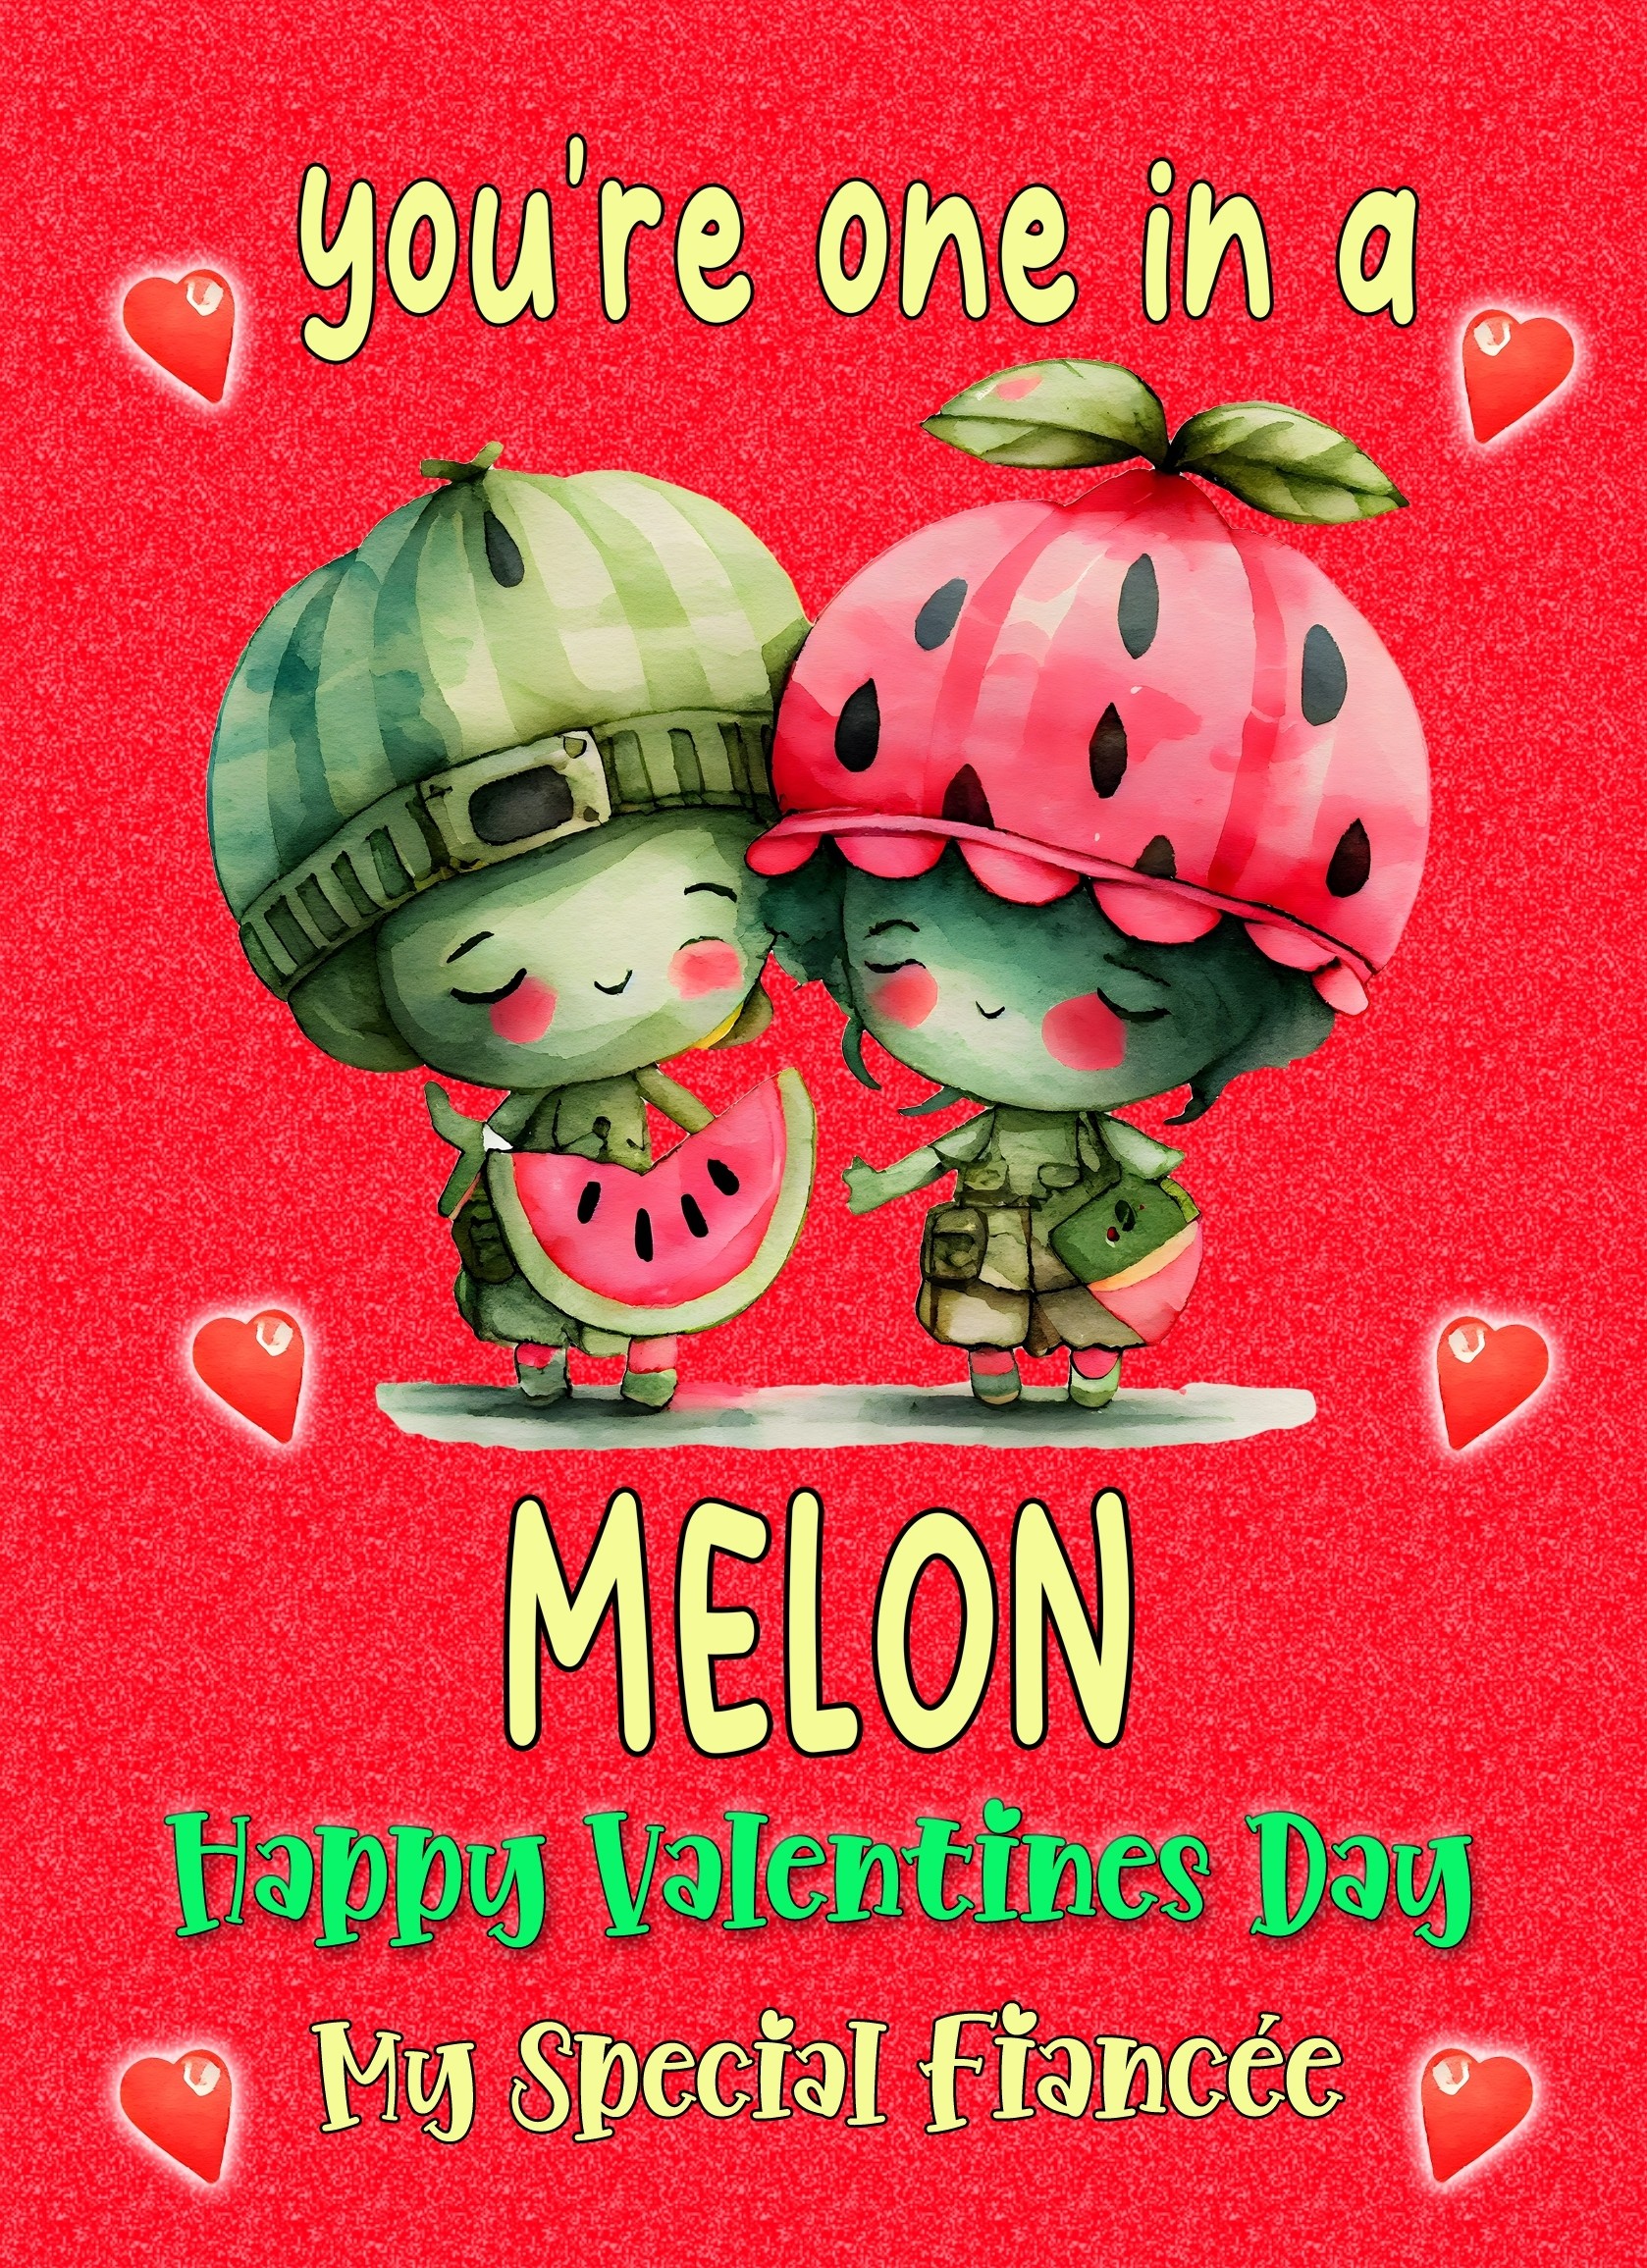 Funny Pun Valentines Day Card for Fiancee (One in a Melon)